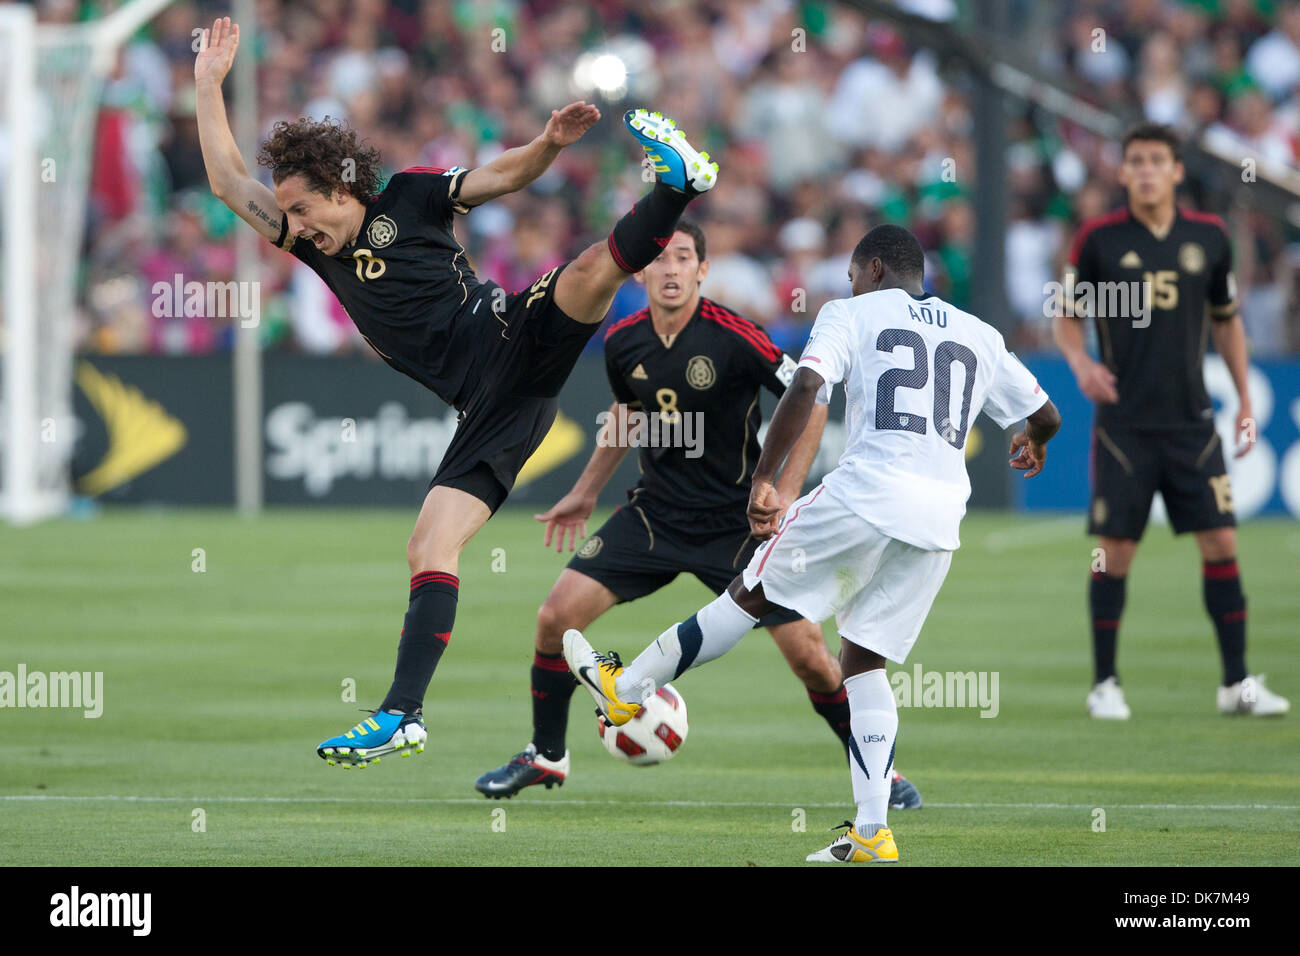 June 25, 2011 - Pasadena, California, U.S - Mexico midfielder Andres Guardado #18 (L) and United States forward Freddy Adu #20 (R) in action during the 2011 CONCACAF Gold Cup championship game between United States and Mexico at a sold out Rose Bowl. Mexico went on to defeat United States with a final score of 4-2. (Credit Image: © Brandon Parry/Southcreek Global/ZUMAPRESS.com) Stock Photo